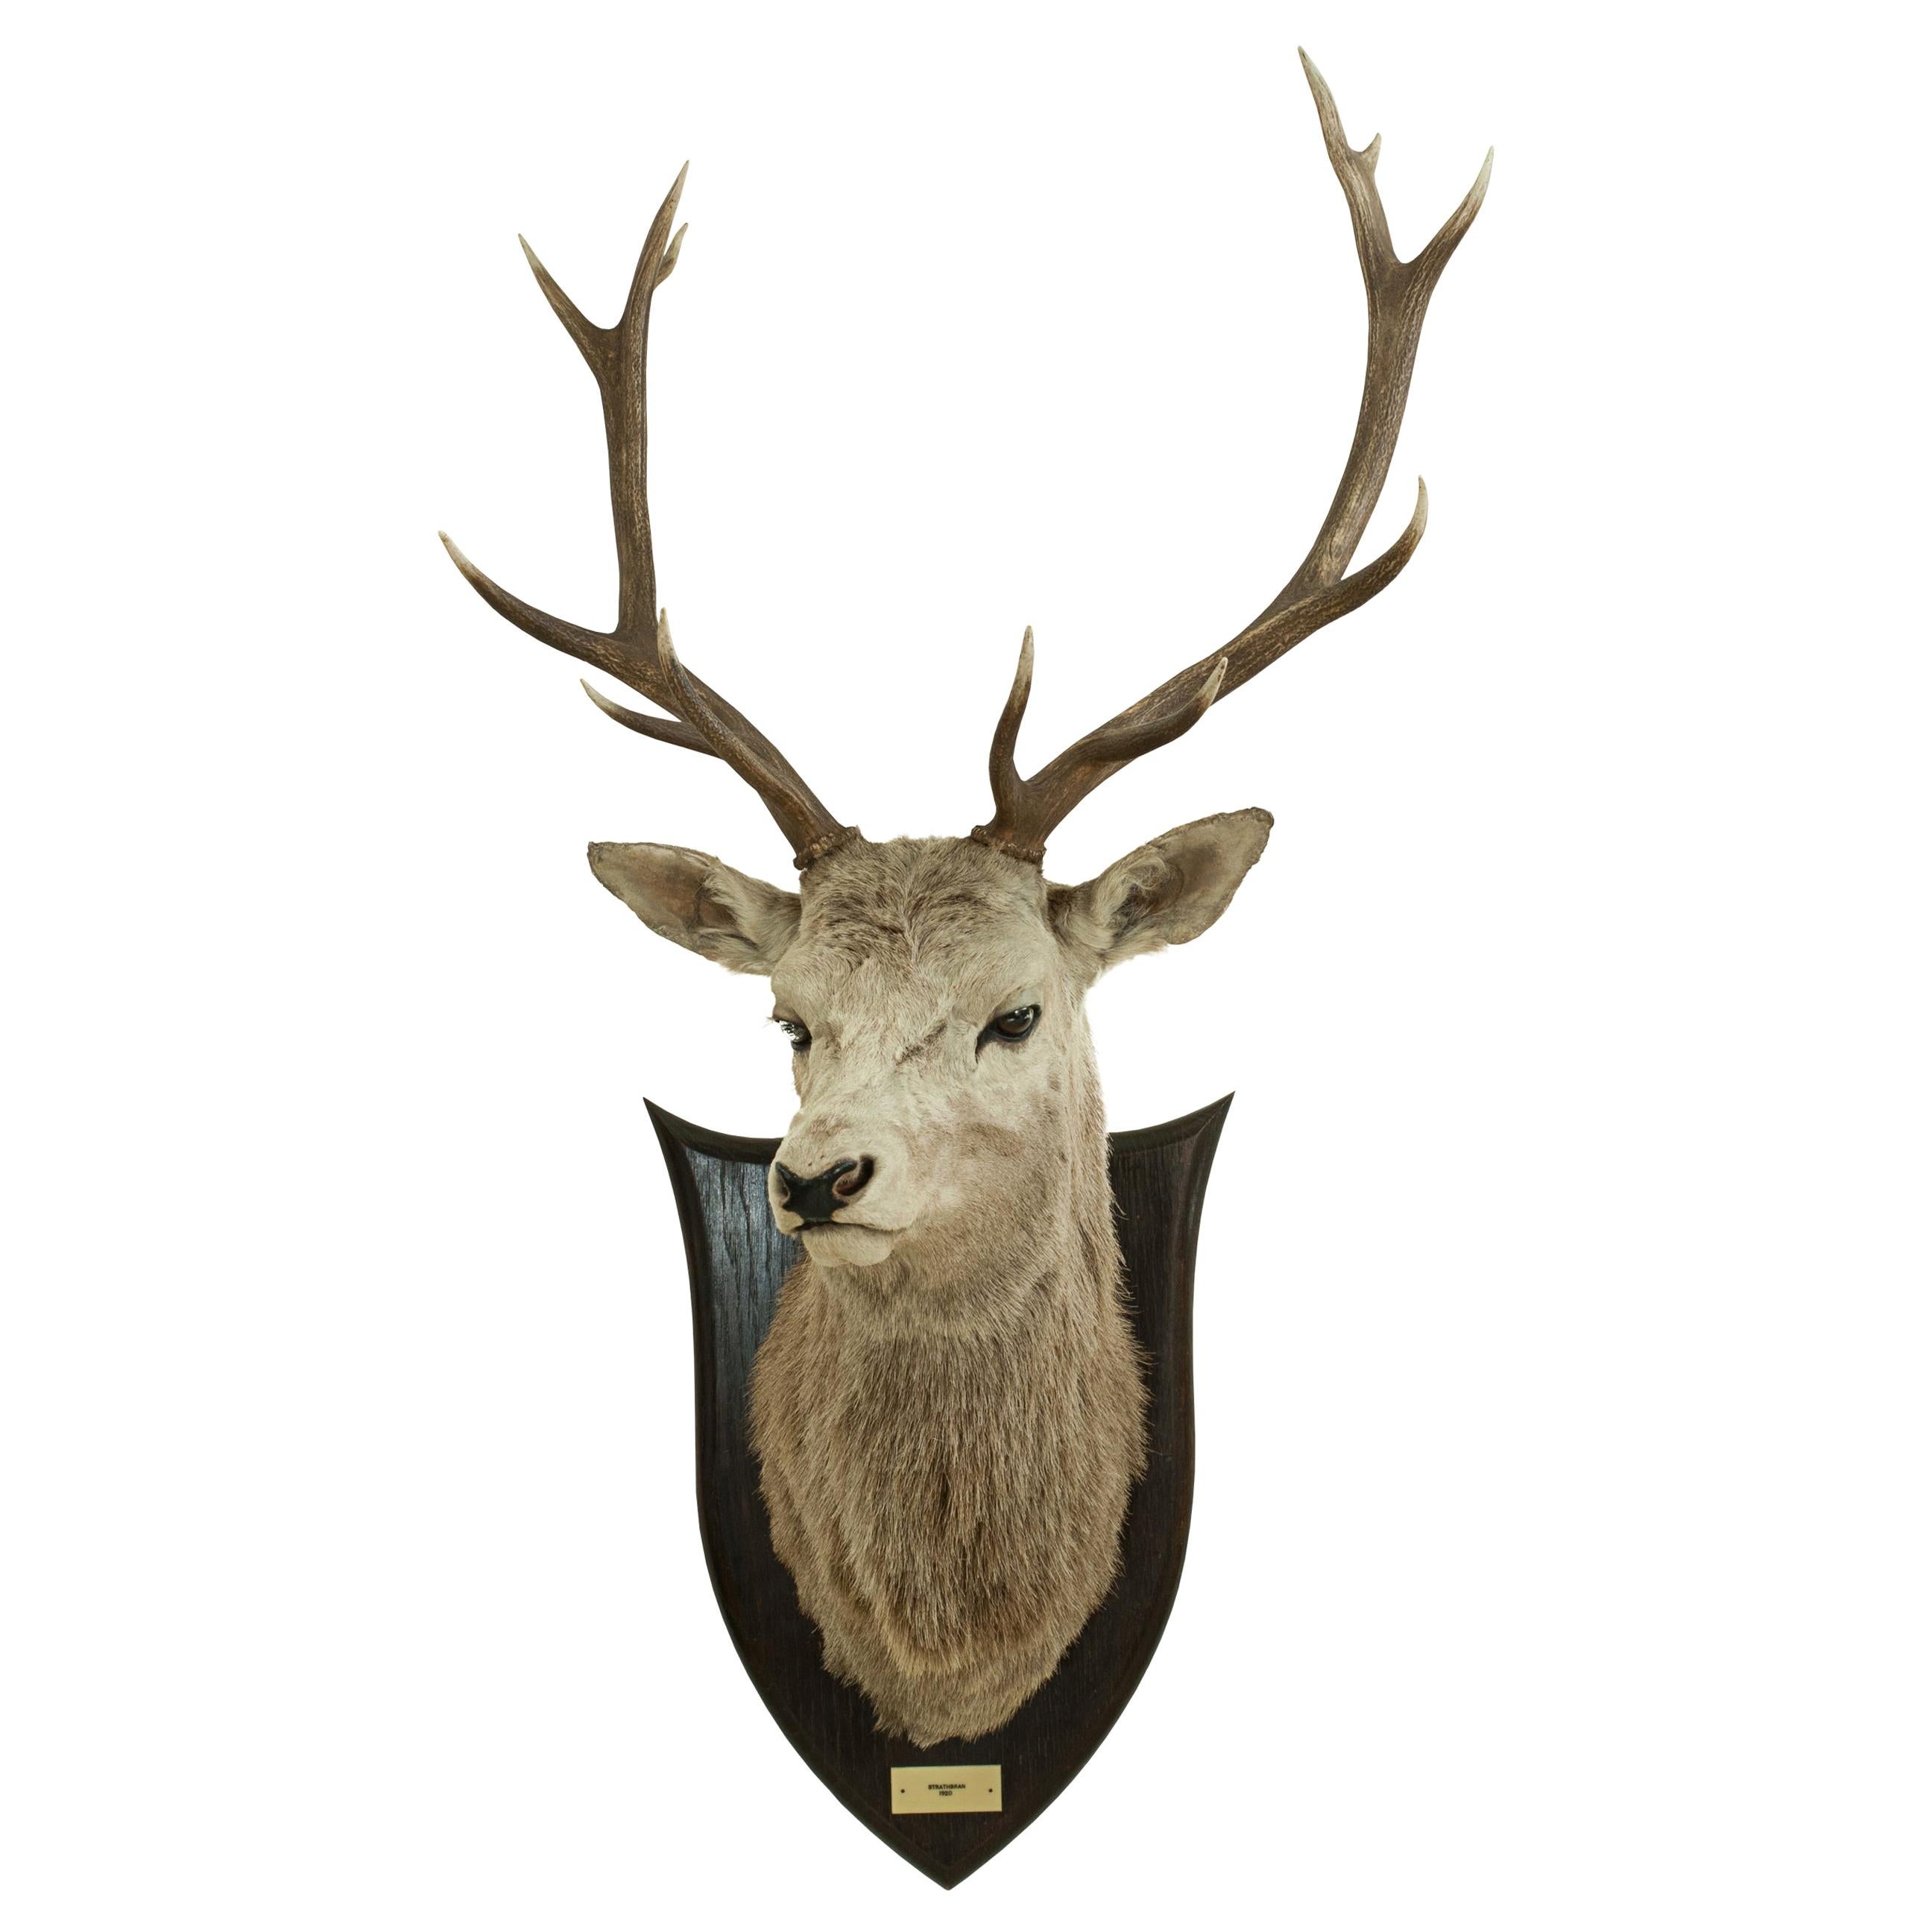 Antique Royal Taxidermy Stag by Spicer of Leamington, Red Deer, Mounted on Oak